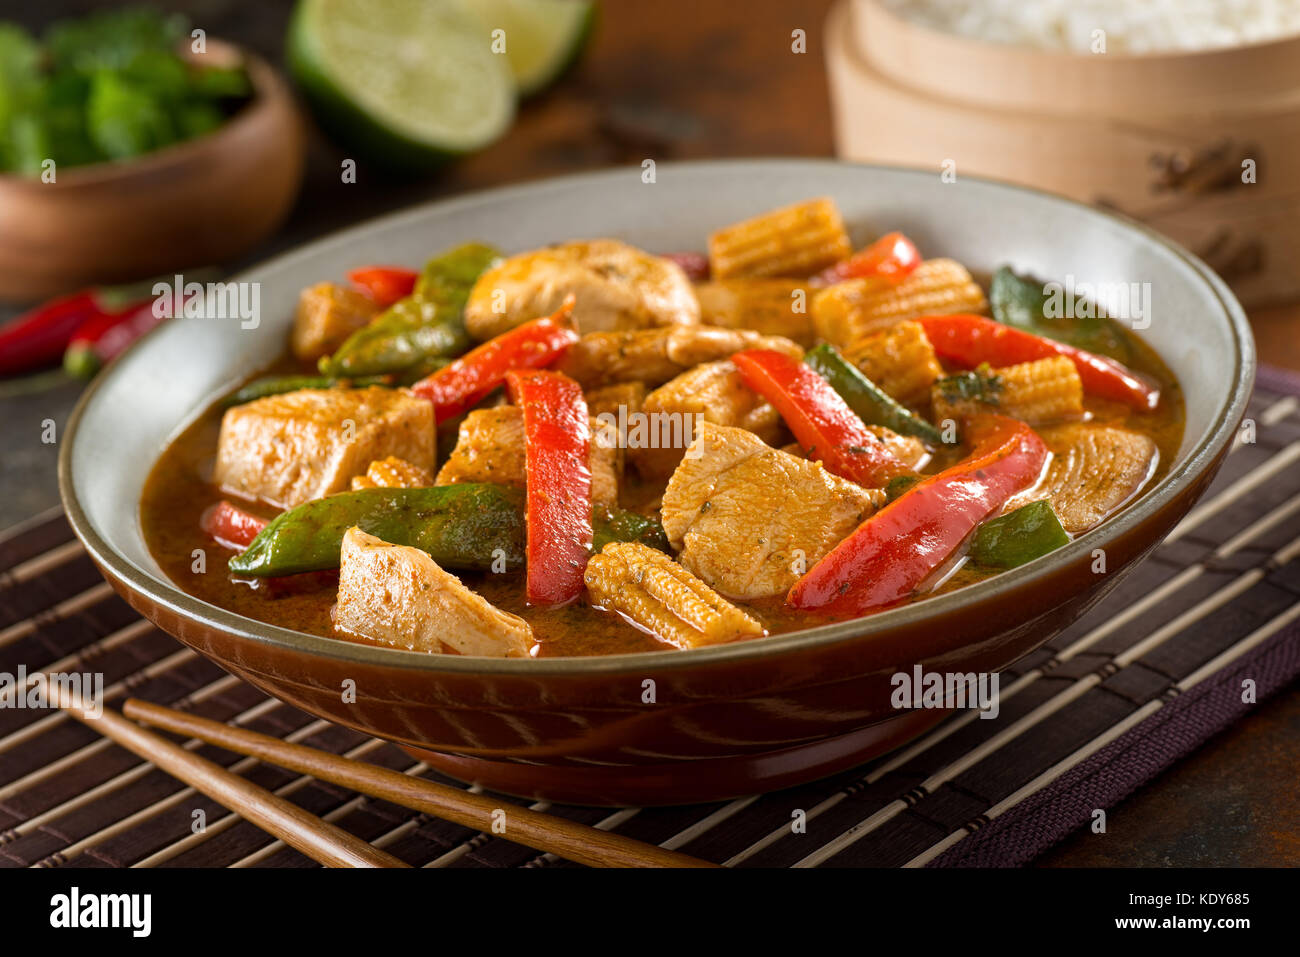 Delicious homemade thai red curry with chicken, red pepper, snow peas, baby corn, coconut milk and cilantro. Stock Photo